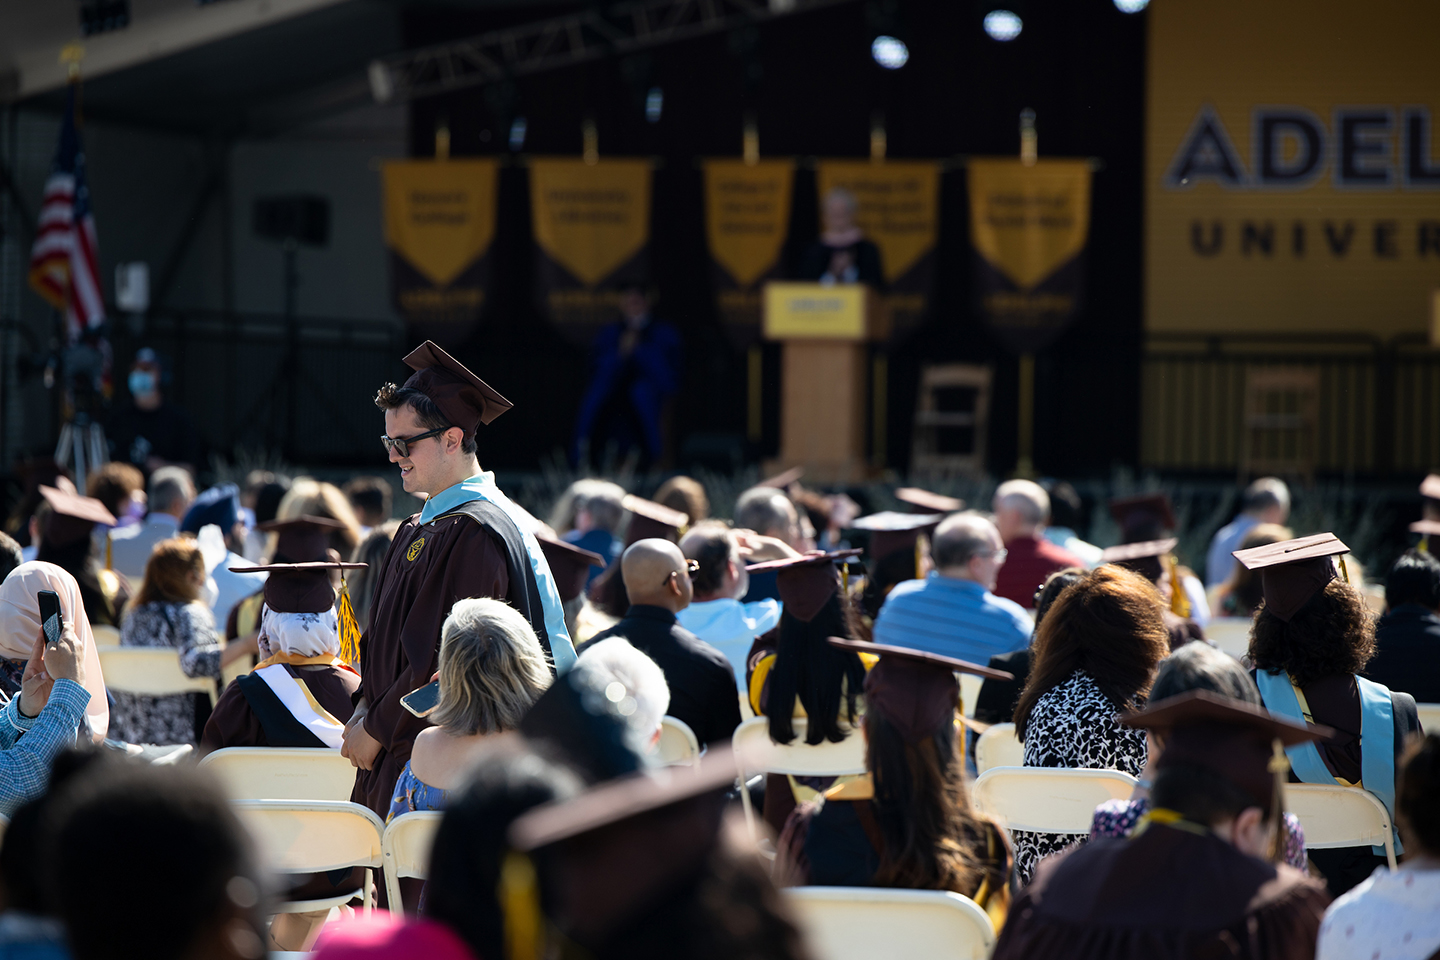 Graduate walking through seated audience with a view of the commencement stage in the background.